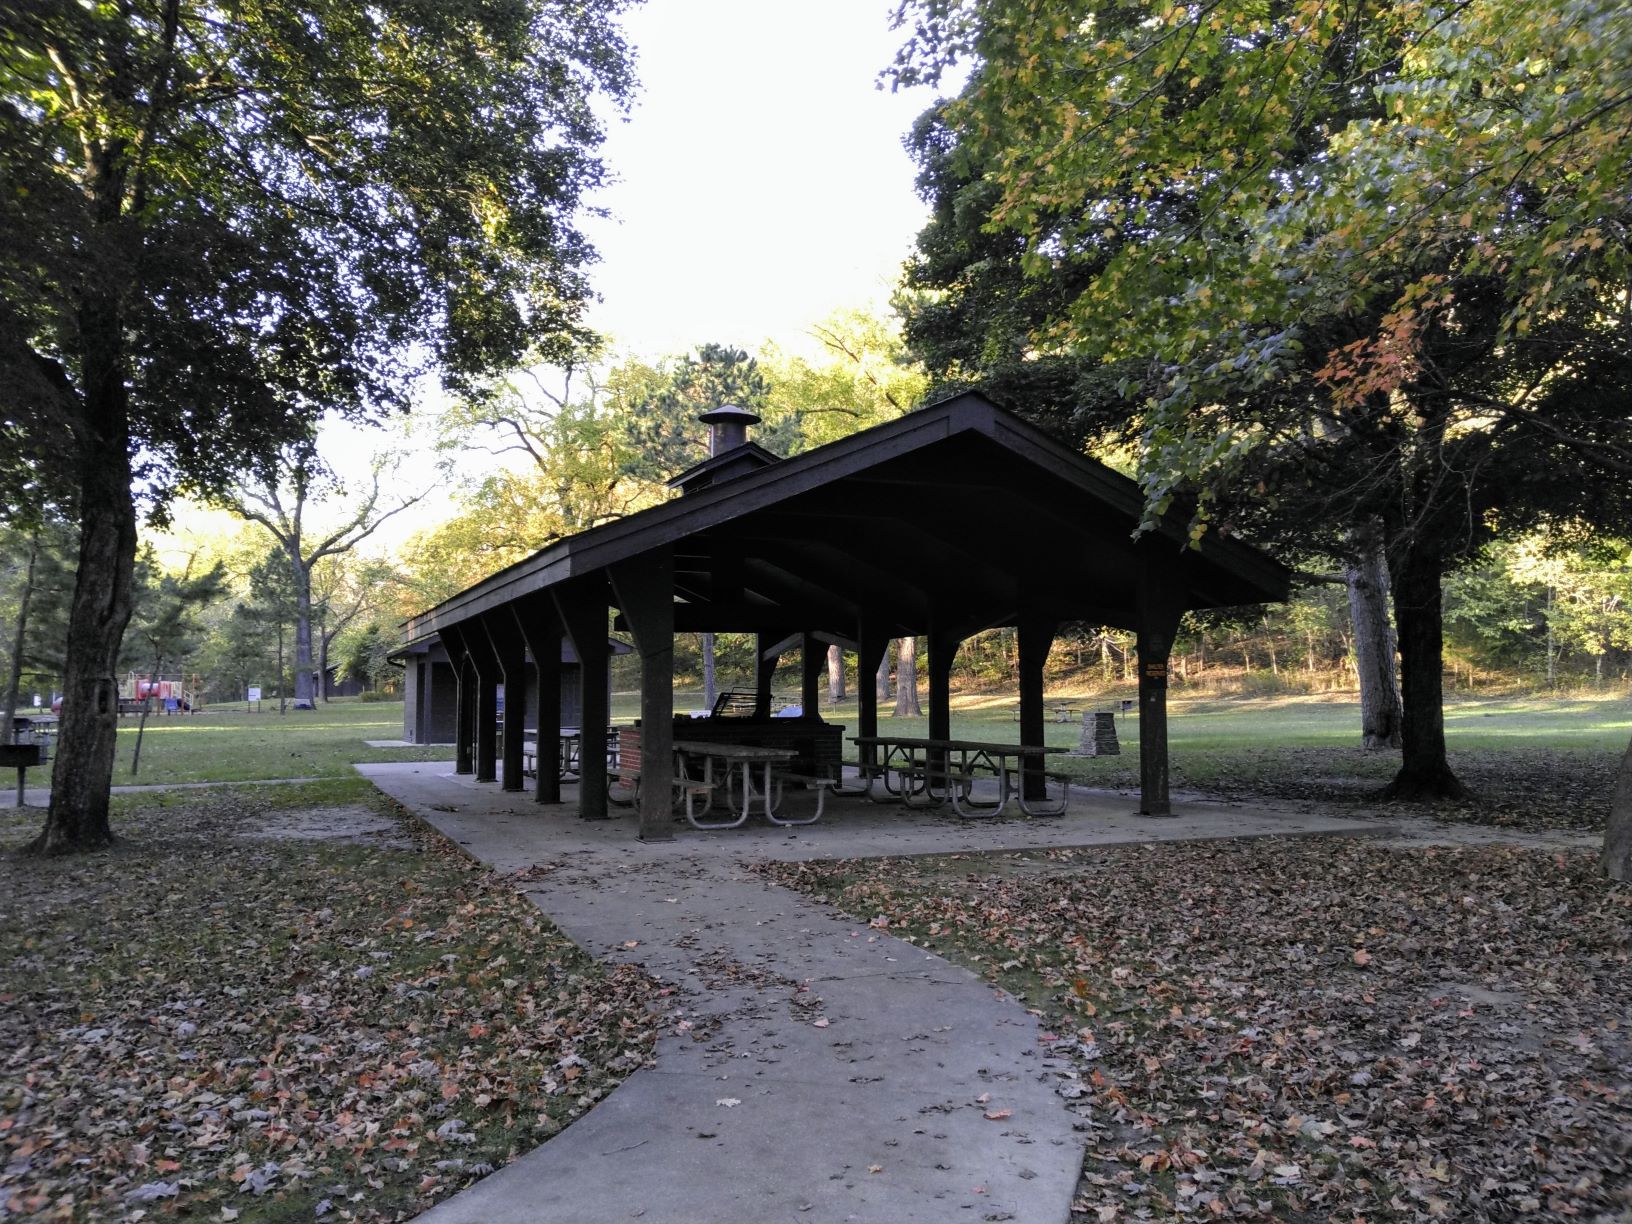 Open picnic shelter with playground in the background